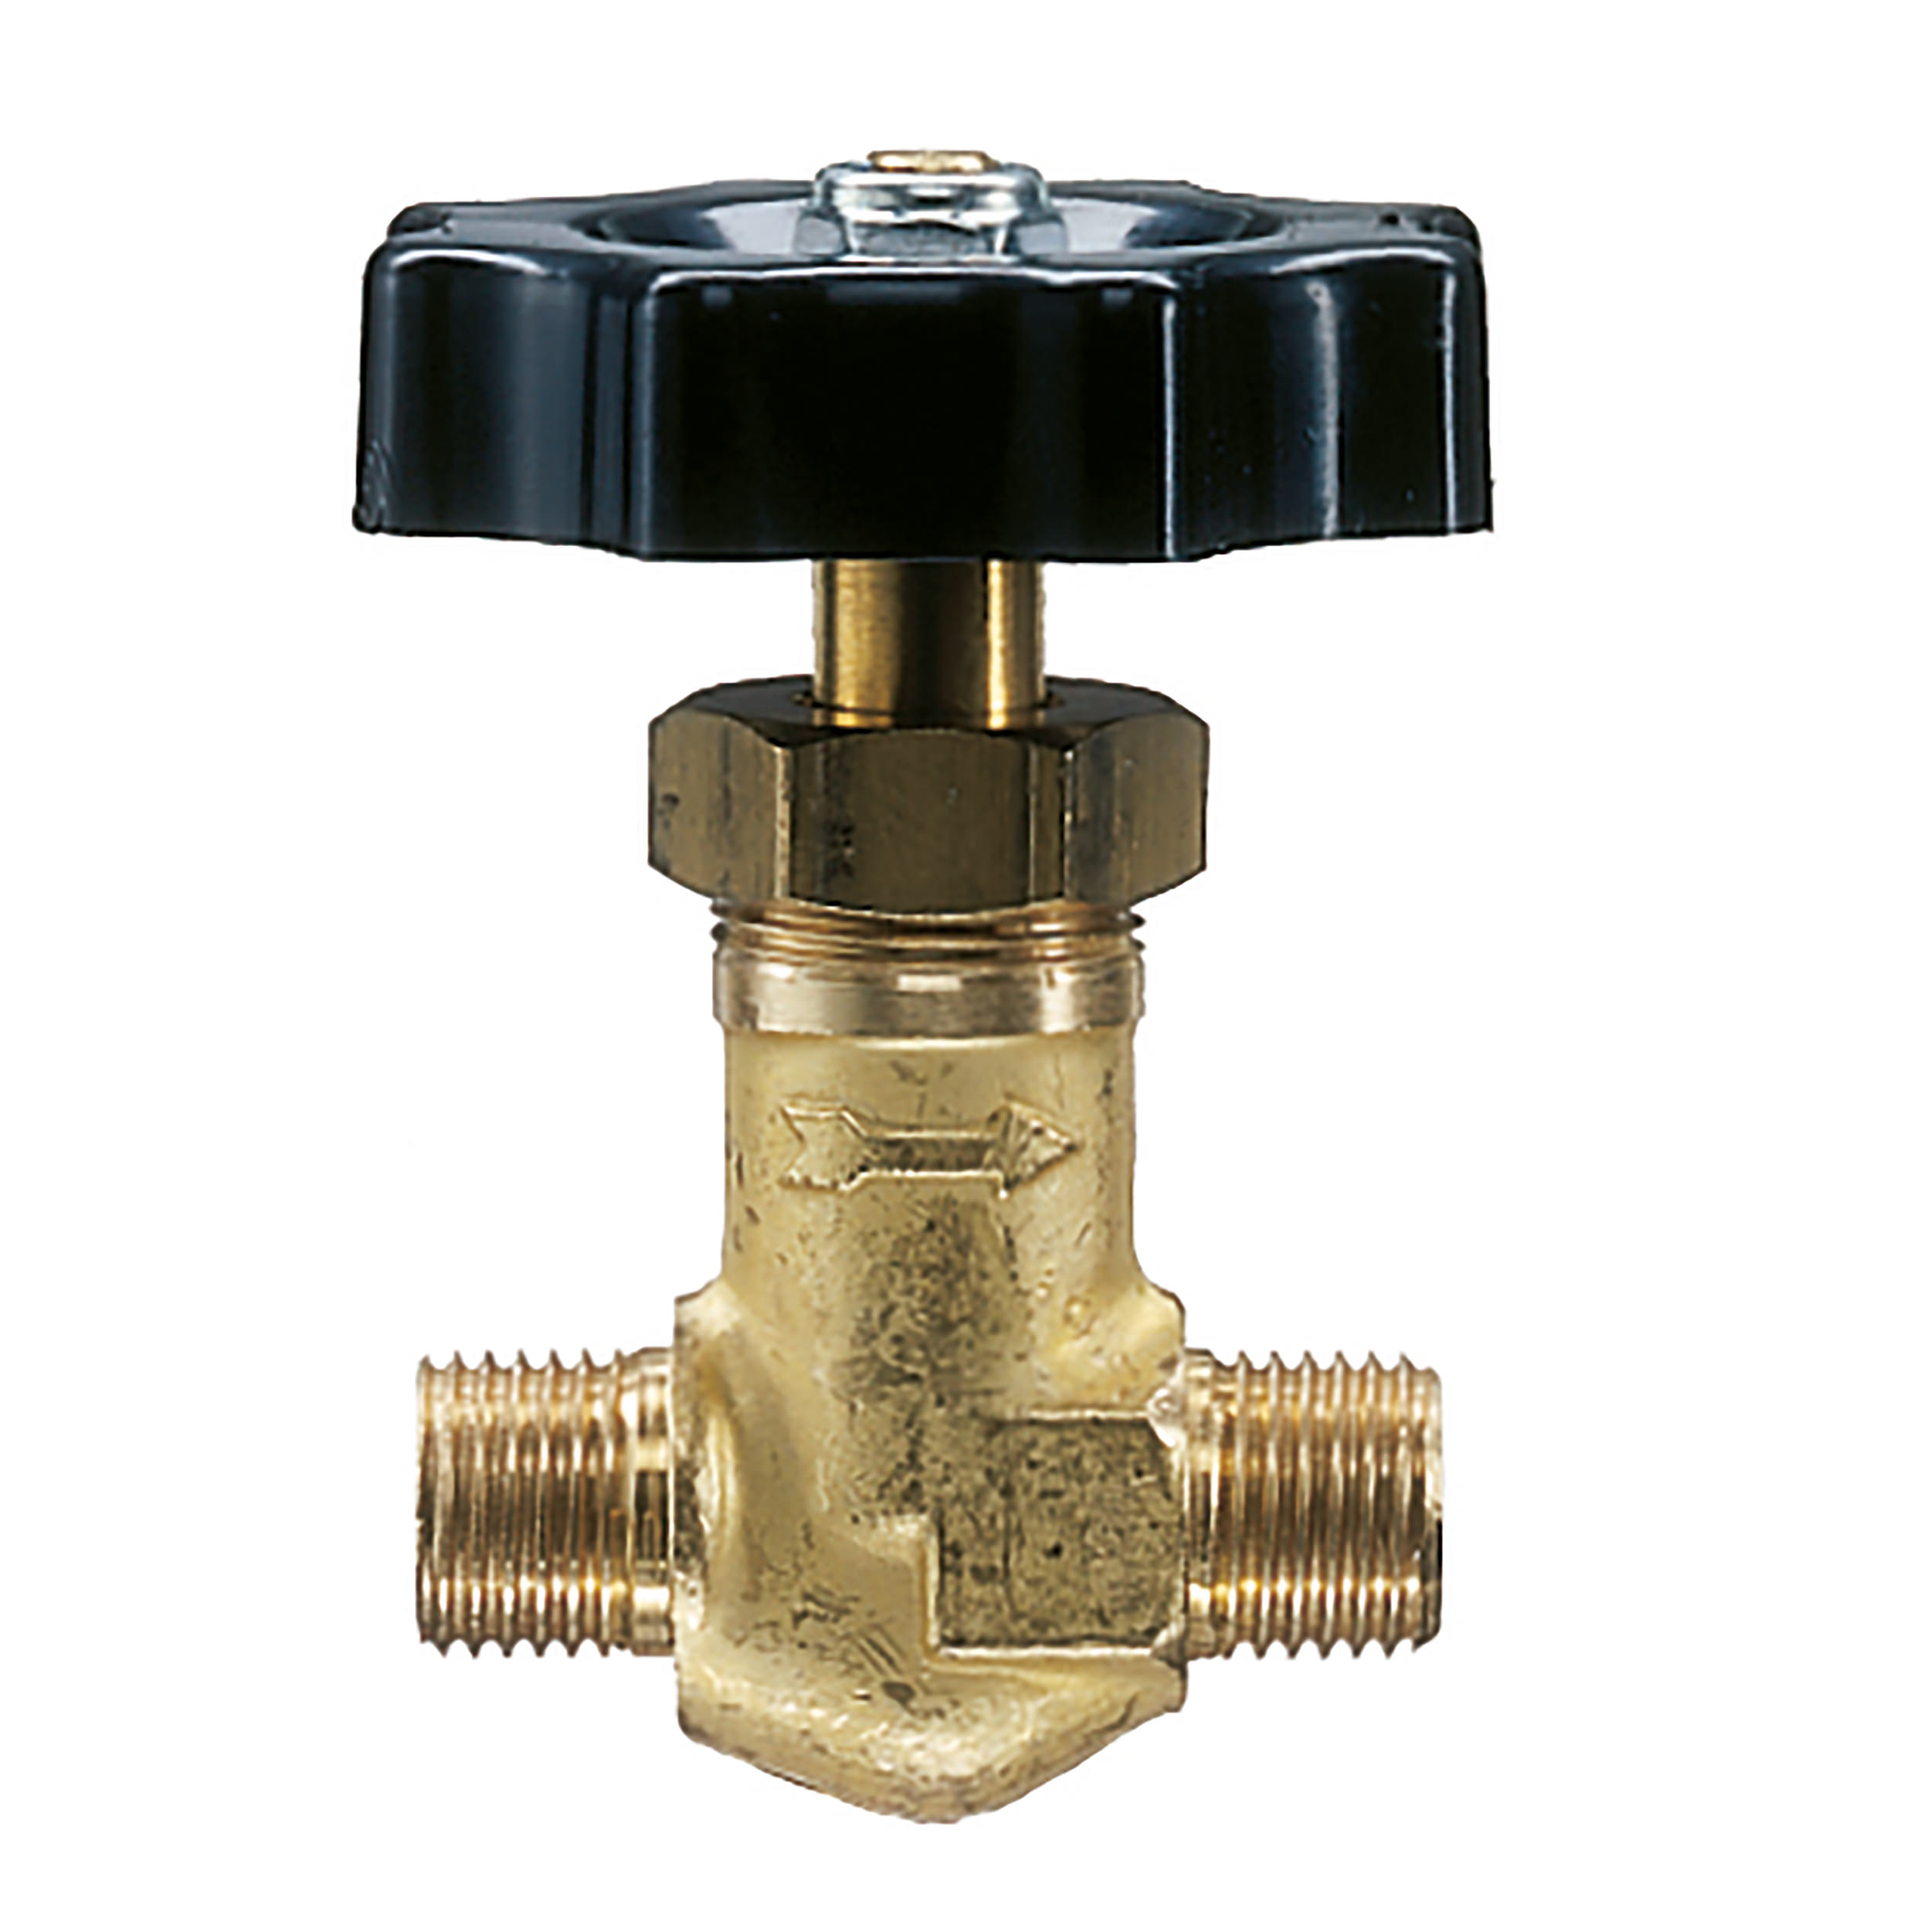 Pin control valve, straight way type, DN 4, max. operating pressure: 580 psi, i: 11 mm, connection thread: ¼ male, l: 42 mm